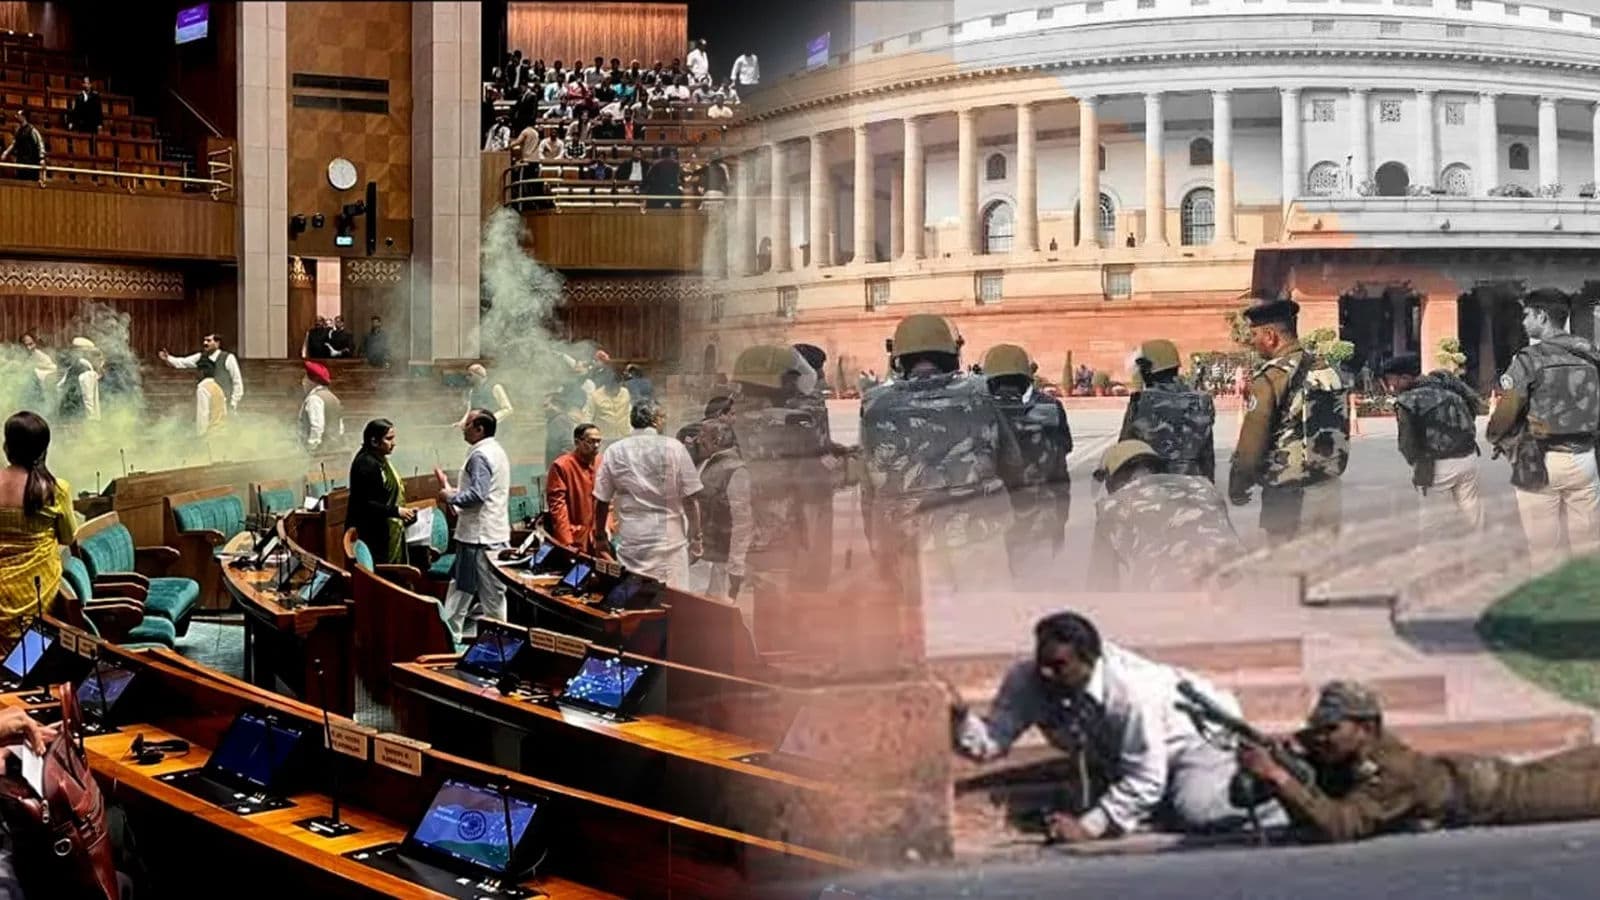 Security Breach at Indian Parliament on 22nd anniversary of 2001 attack raises alarms, reminiscent of a dark chapter in Indian democracy.